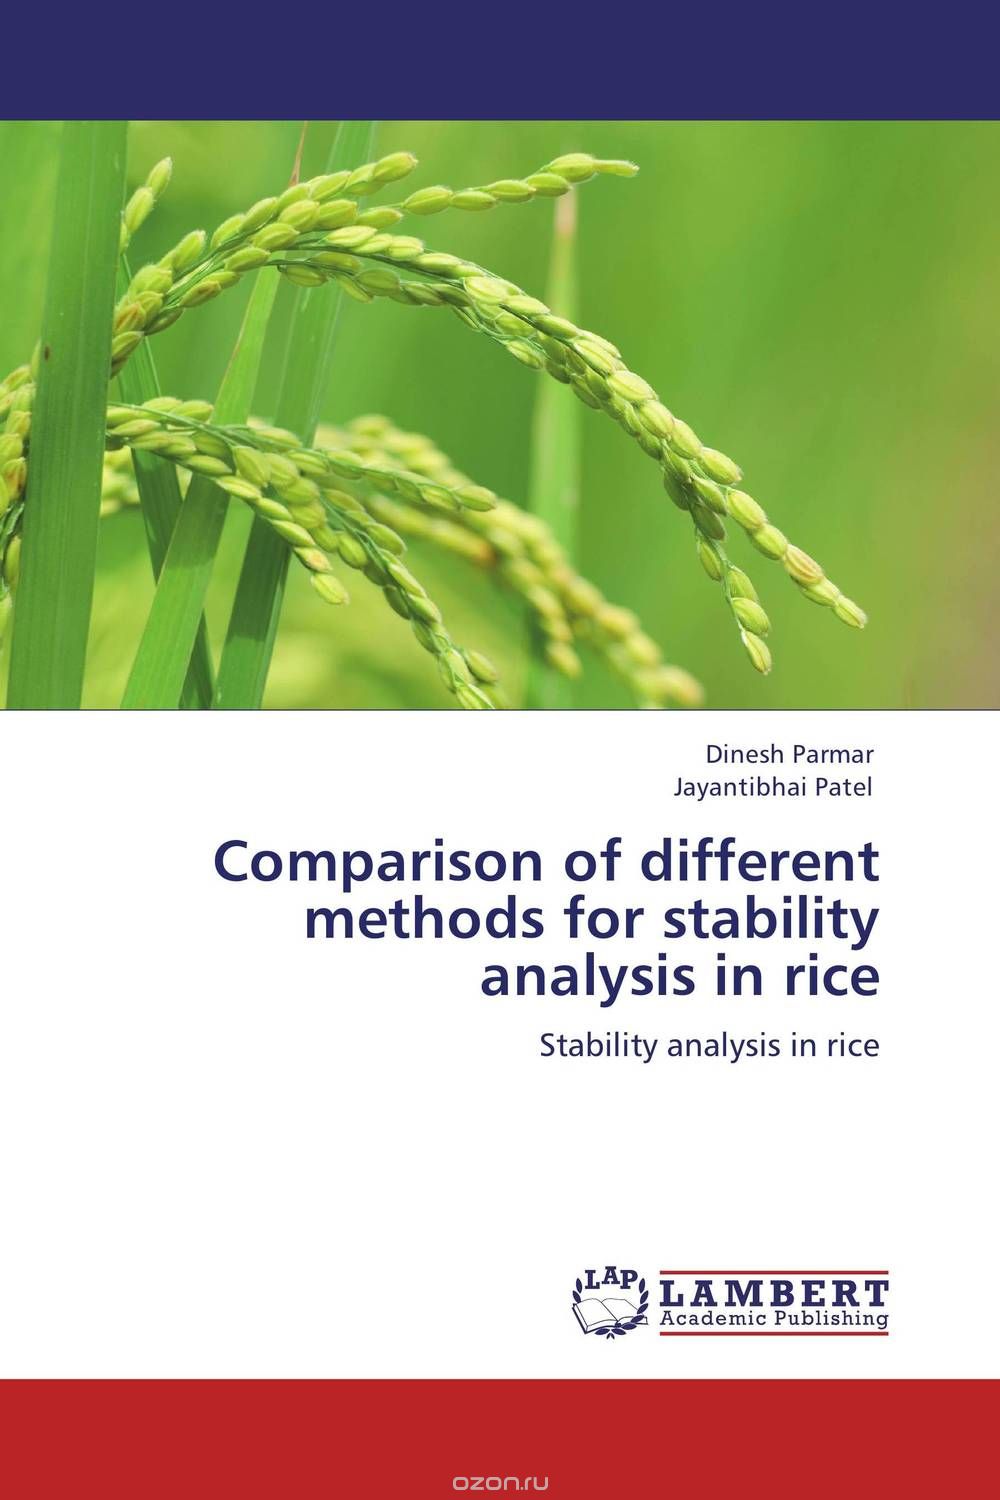 Скачать книгу "Comparison of different methods for stability analysis in rice"